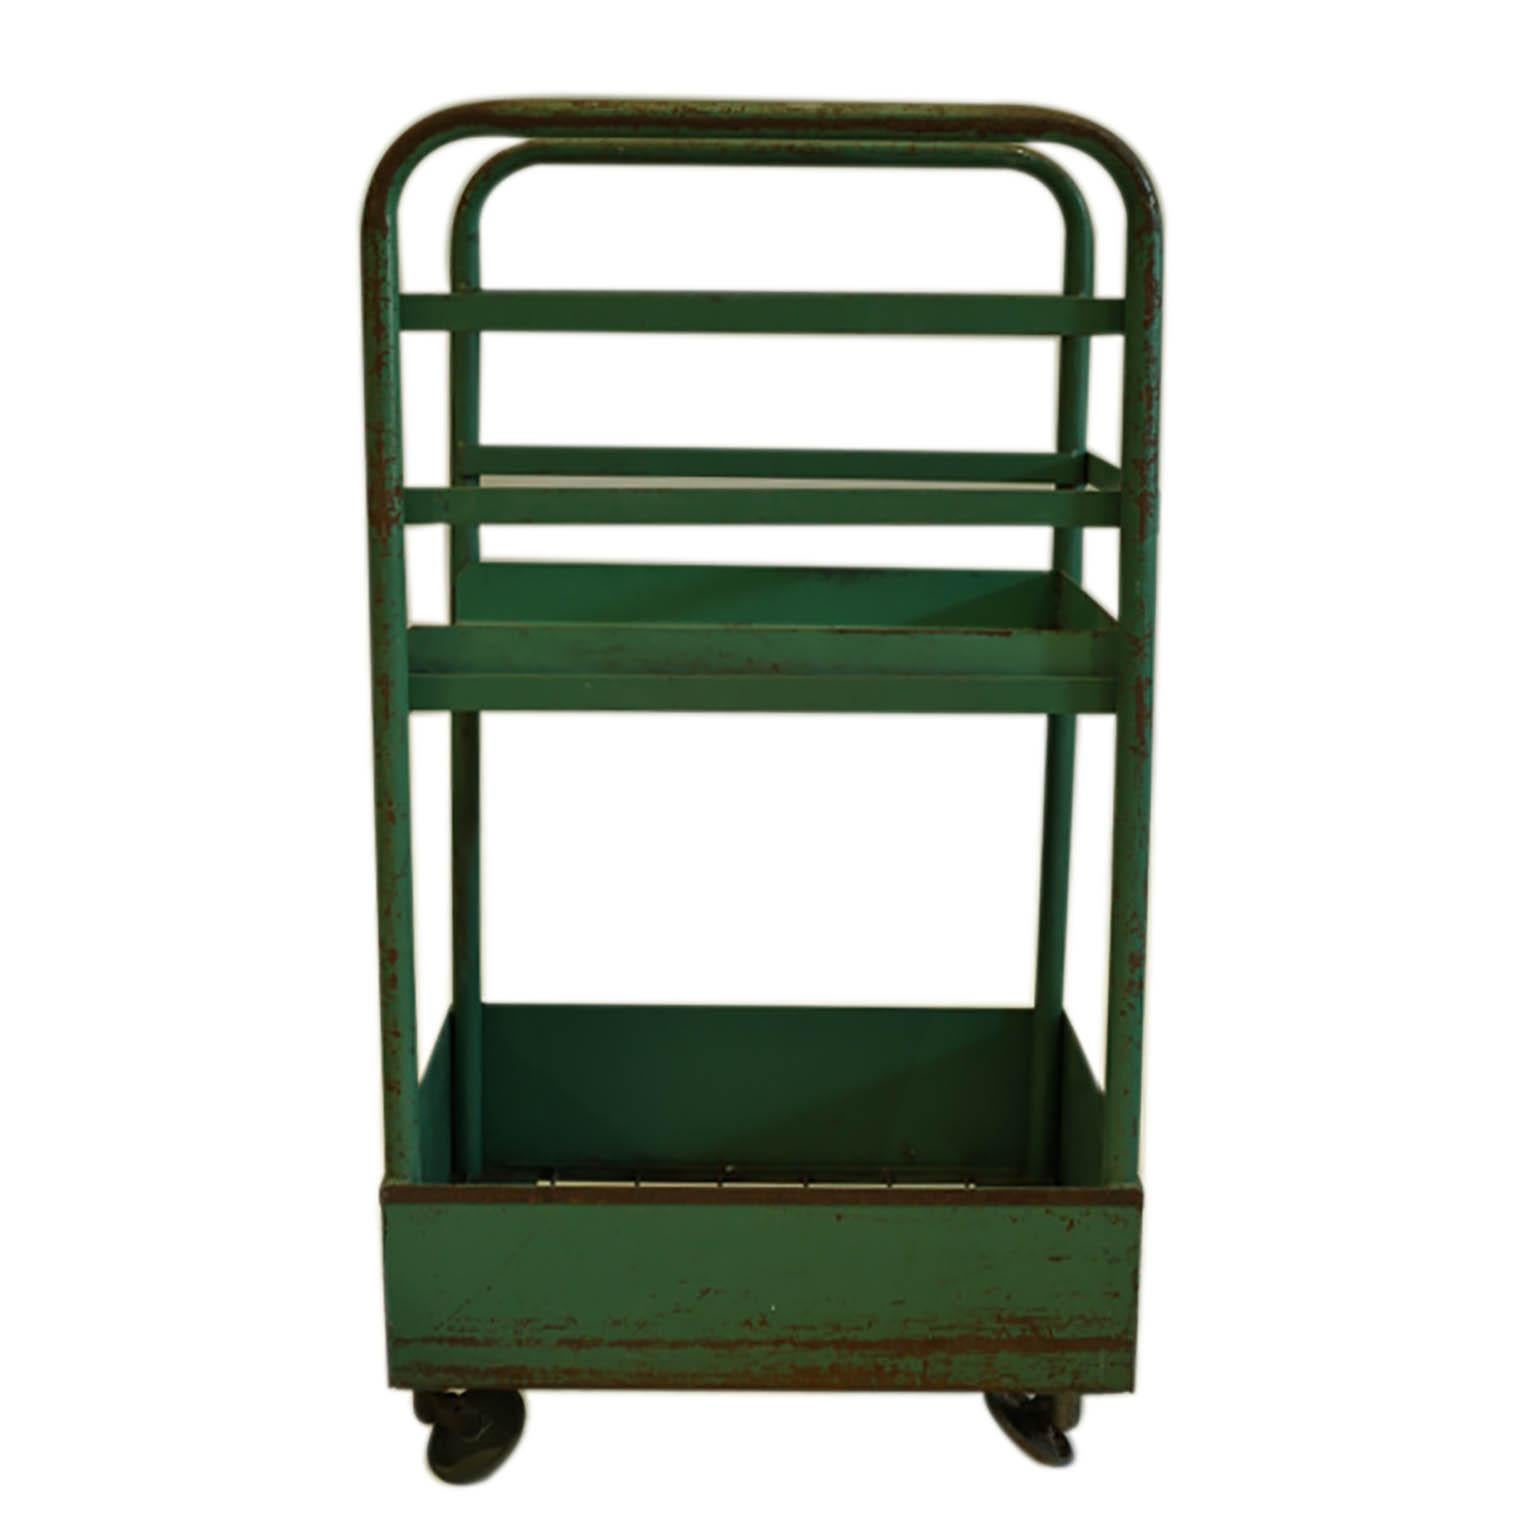 Industrial steel factory cart with original green paint. The top tray is removable and is open on one side. All four wheels are at a 45 degree angle, presumably to spin around easily on the factory floor. Original purpose unknown.